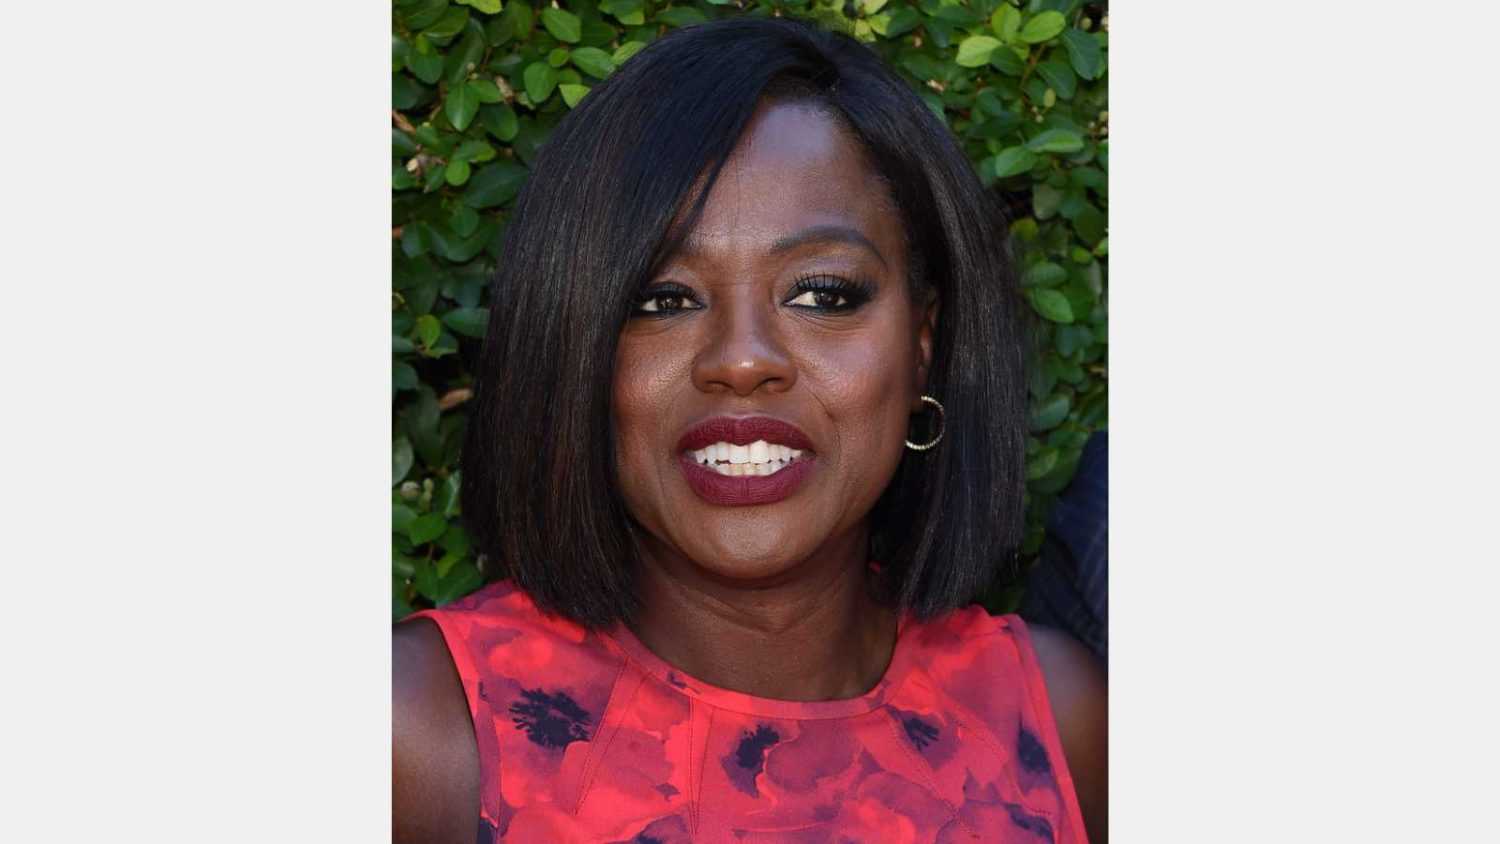 LOS ANGELES - SEP 25: Viola Davis arrives to the The Rape Foundation Annual Brunch on September 25, 2016 in Hollywood, CA